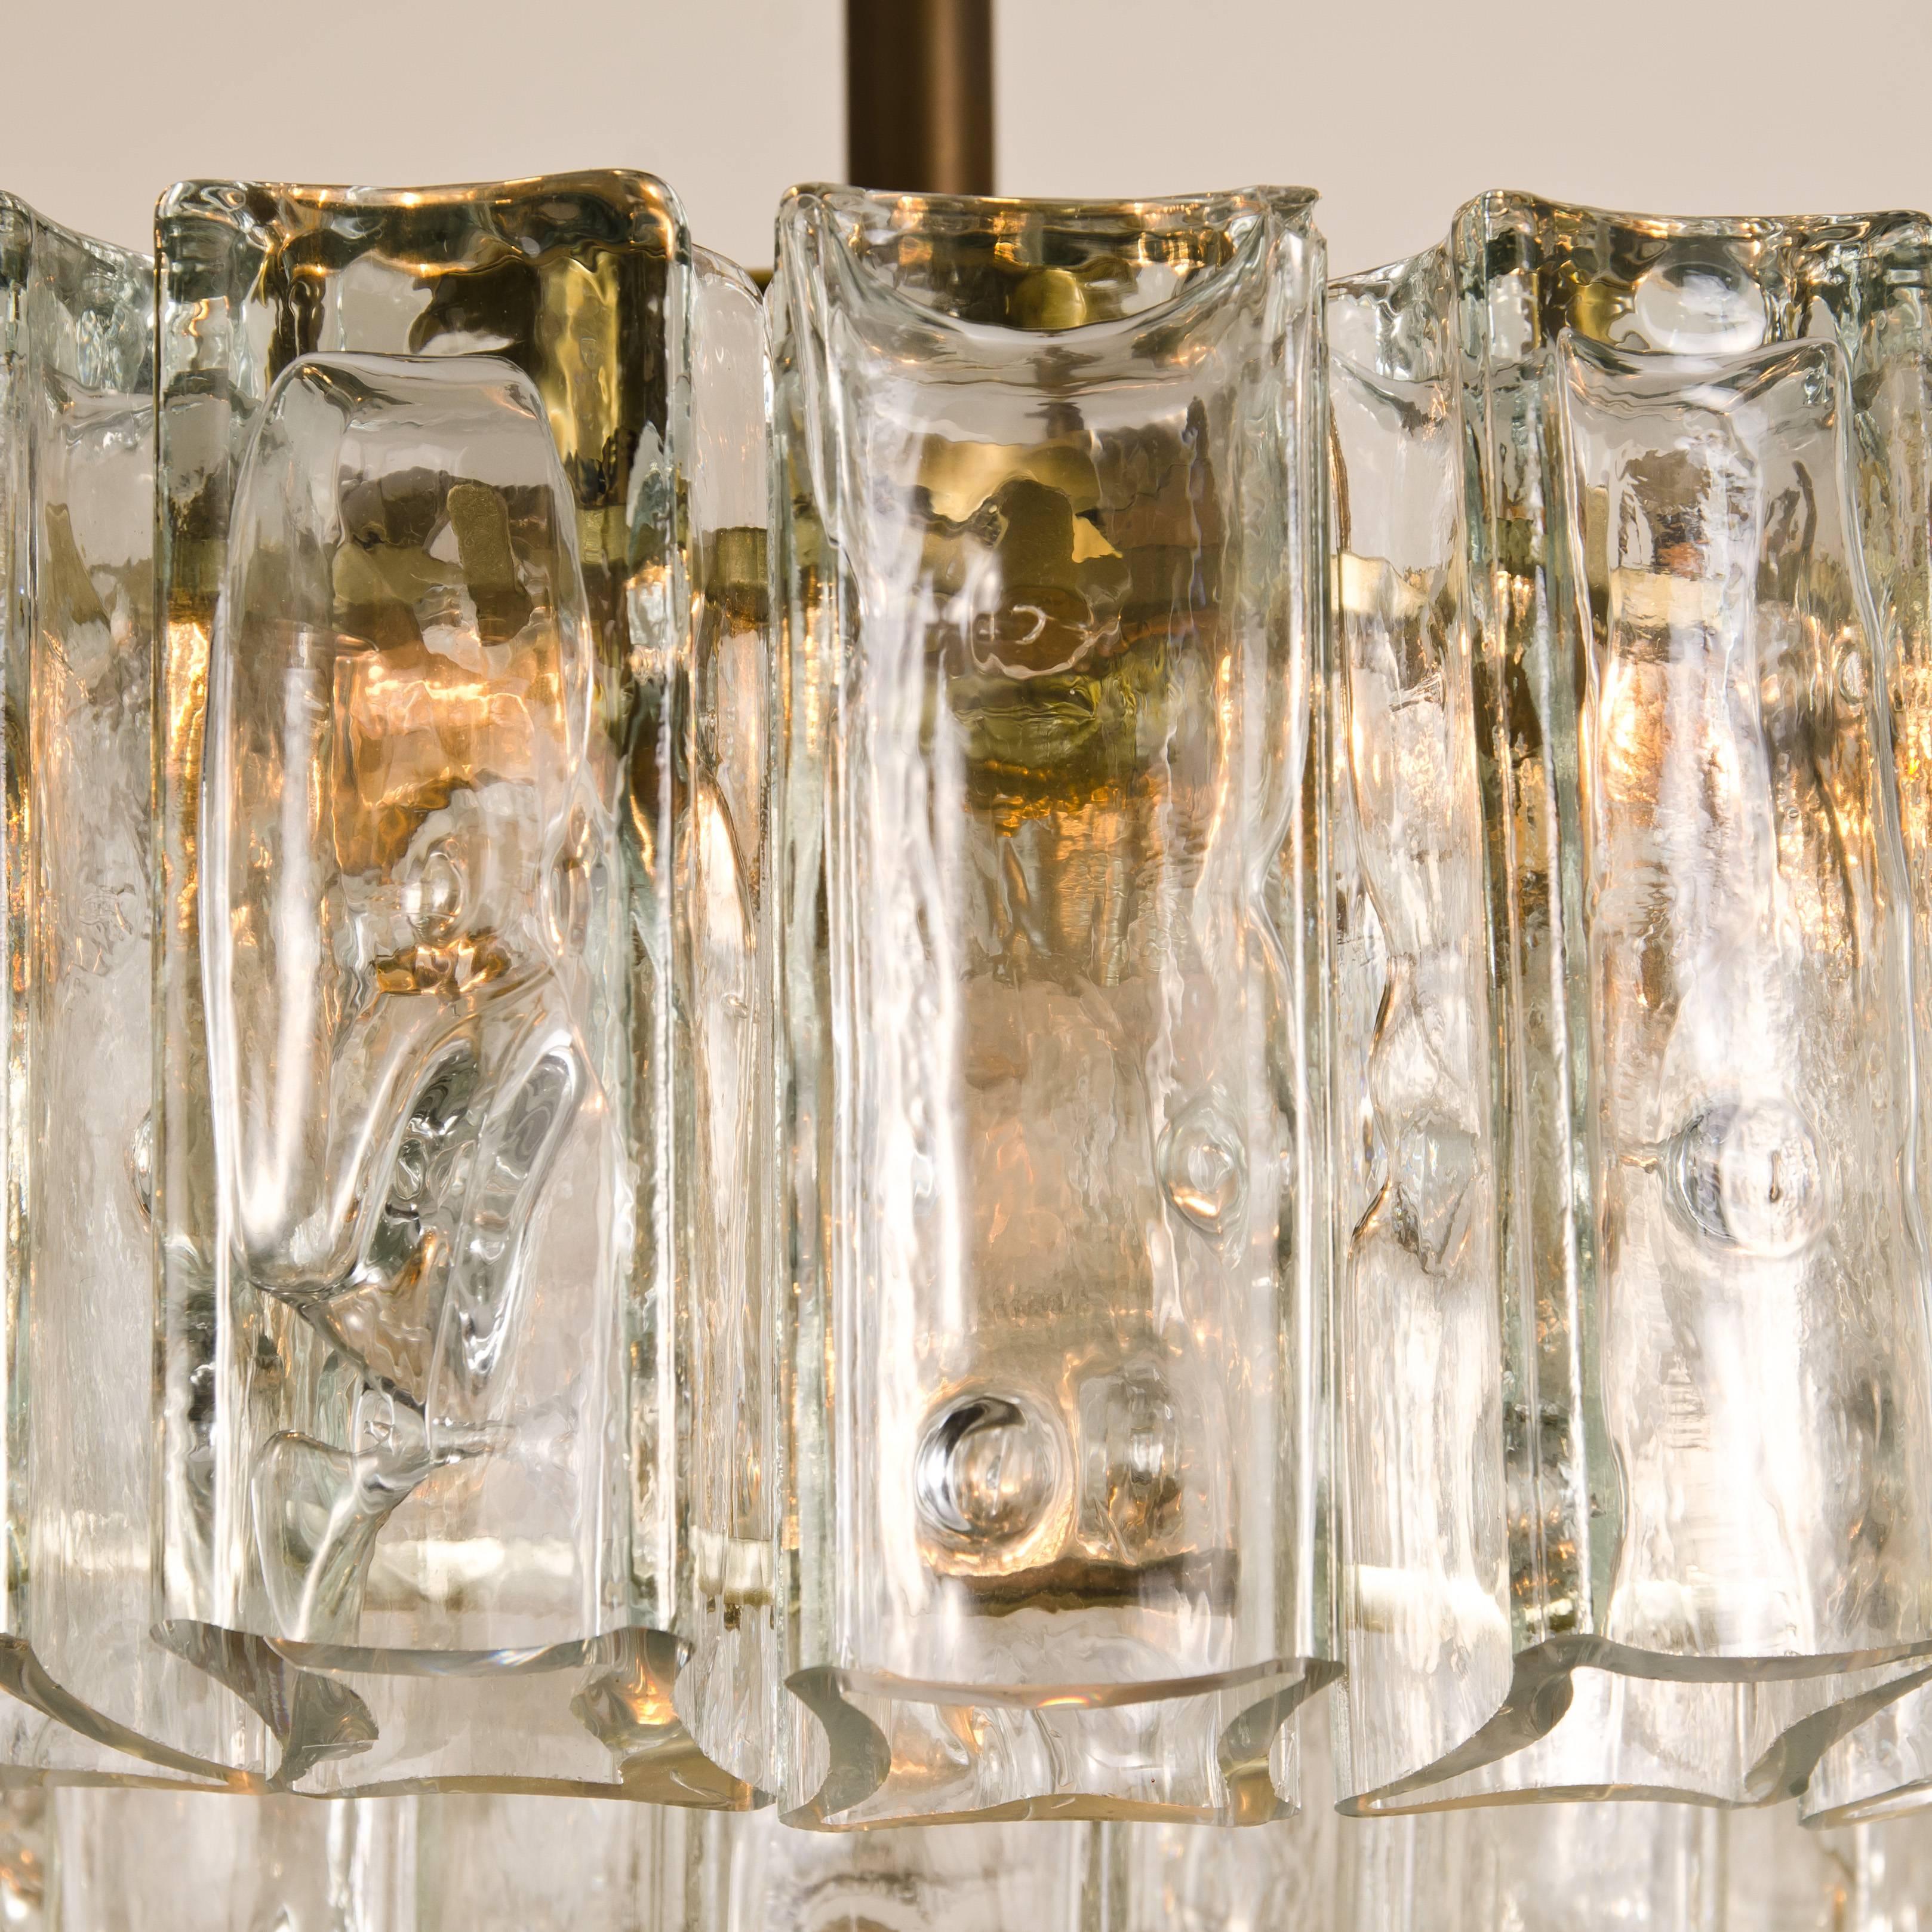 Wonderful and very heavy quality chandelier made by Kalmar, Austria, manufactured, circa 1970-1979. The chandelier has four sockets and two layers of extremely stylish solid glass tubes dangling on it. The sheets beautifully refracting light. It